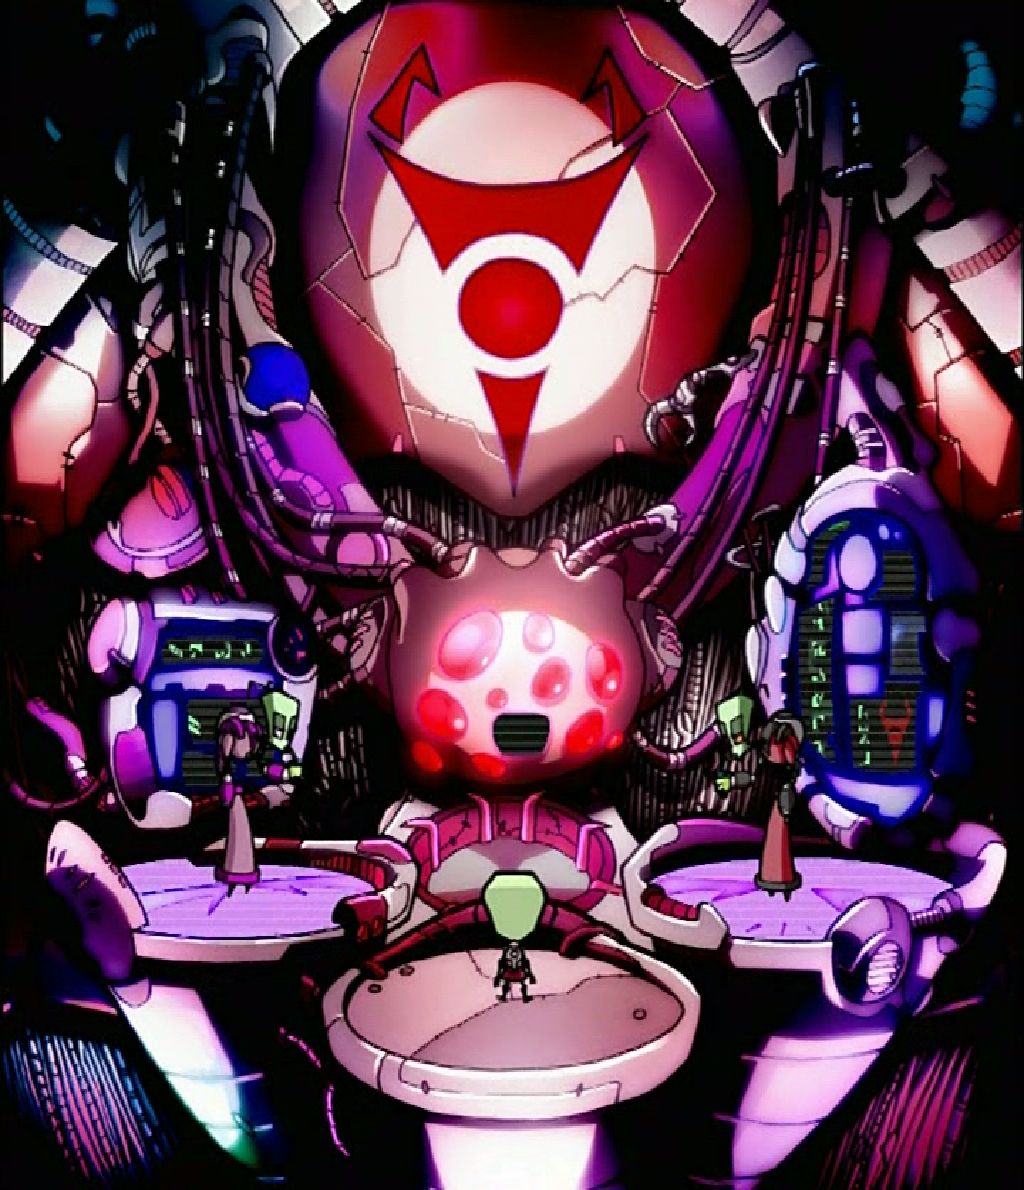 Invader Zim and the wonderful world of background art | The ...